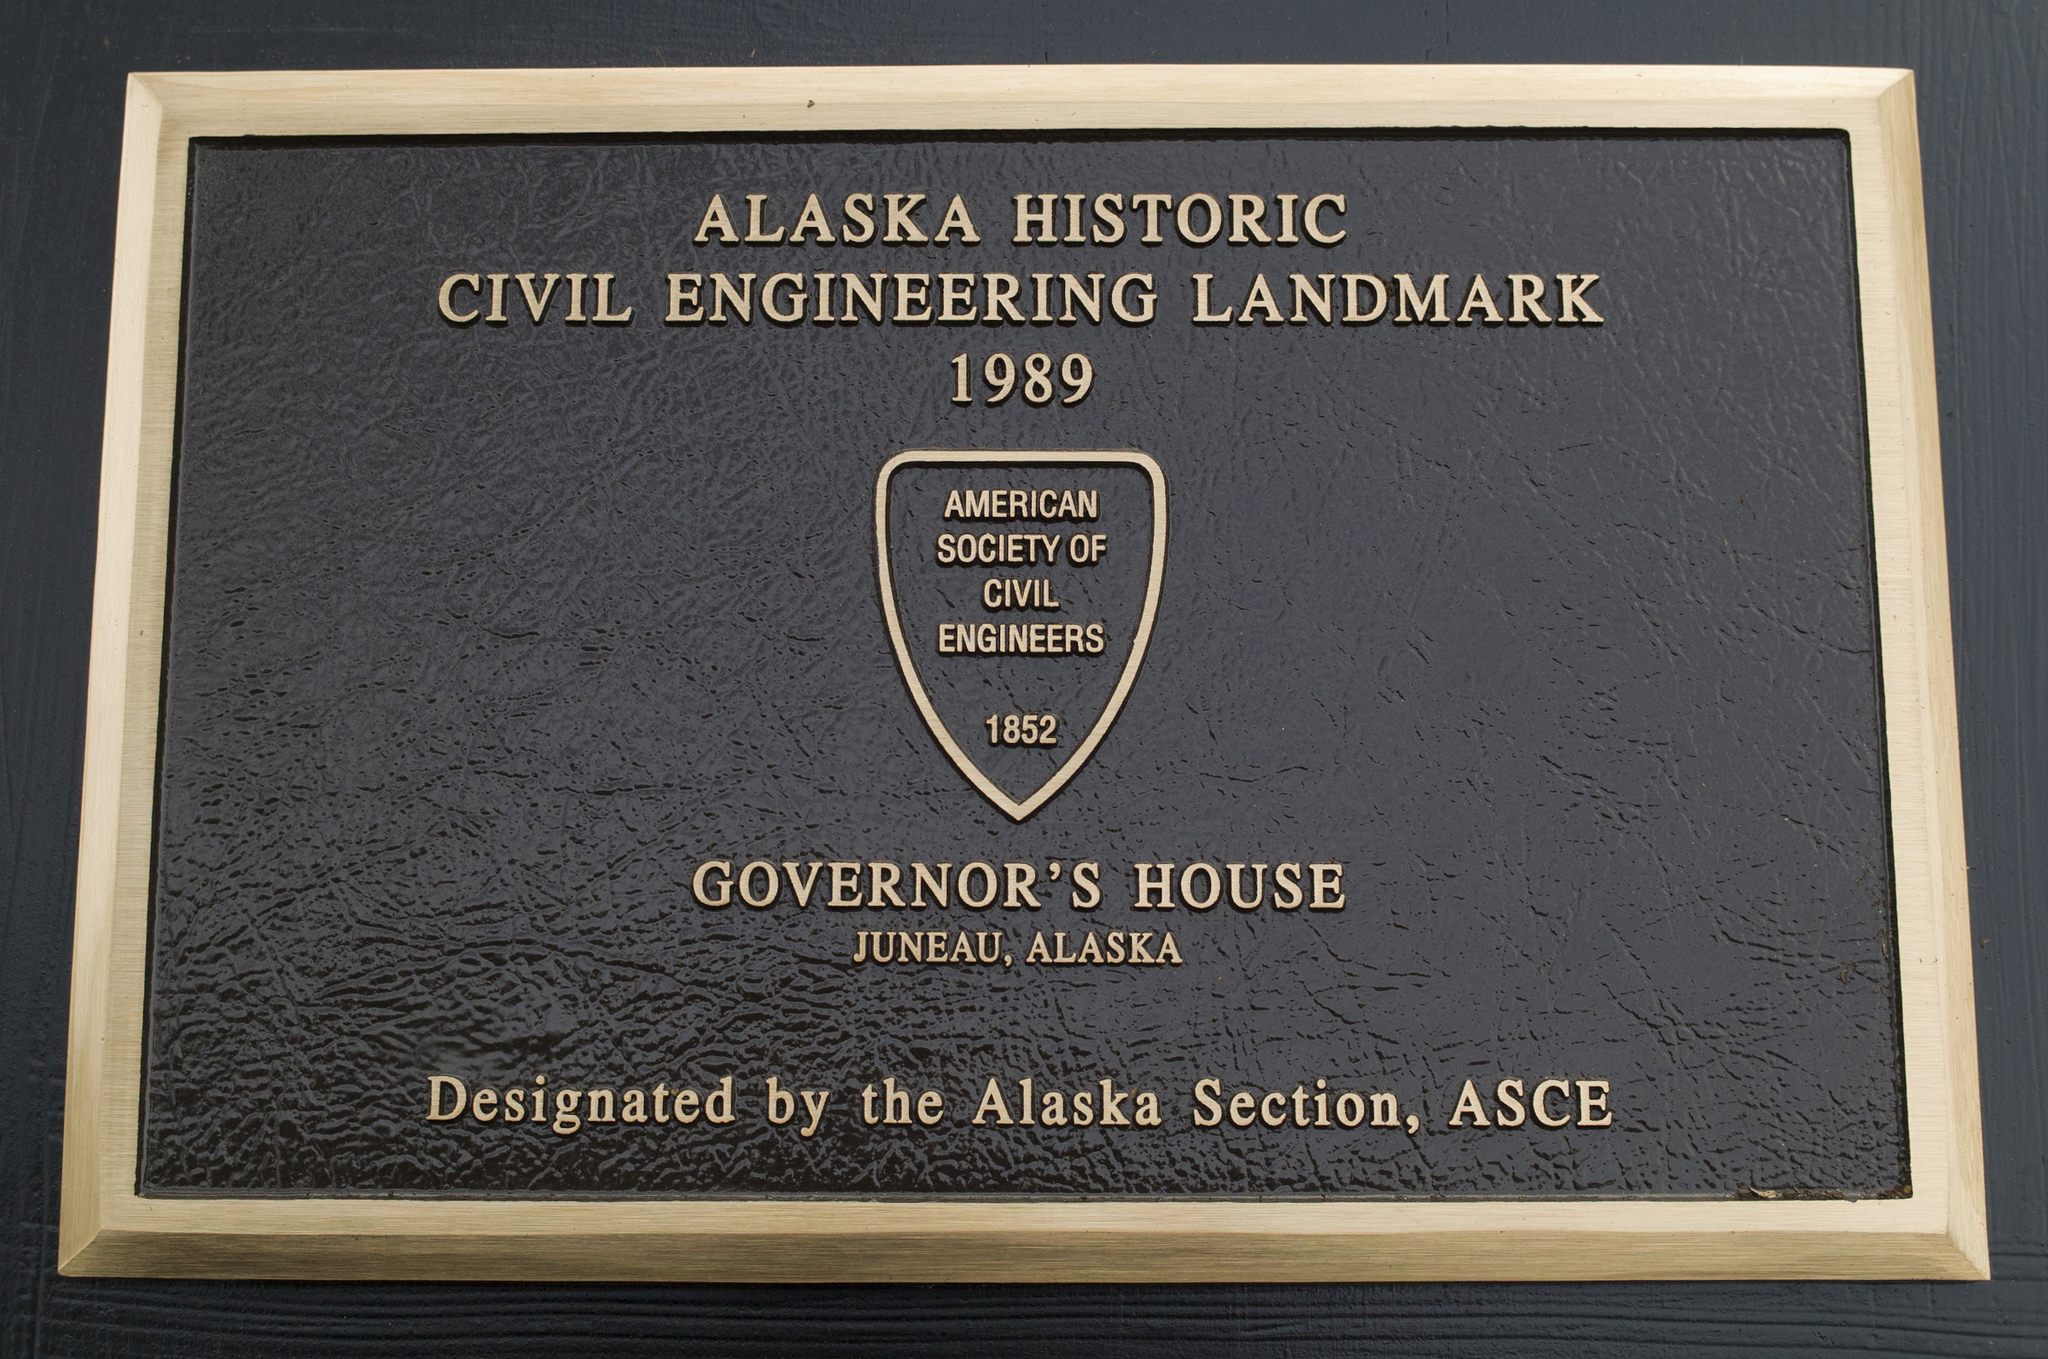 A new American Society of Civil Engineers plaque recognizing the Governor’s House as a Historic Civil Engineering Landmark in Juneau on Wednesday. (Michael Penn | Juneau Empire)